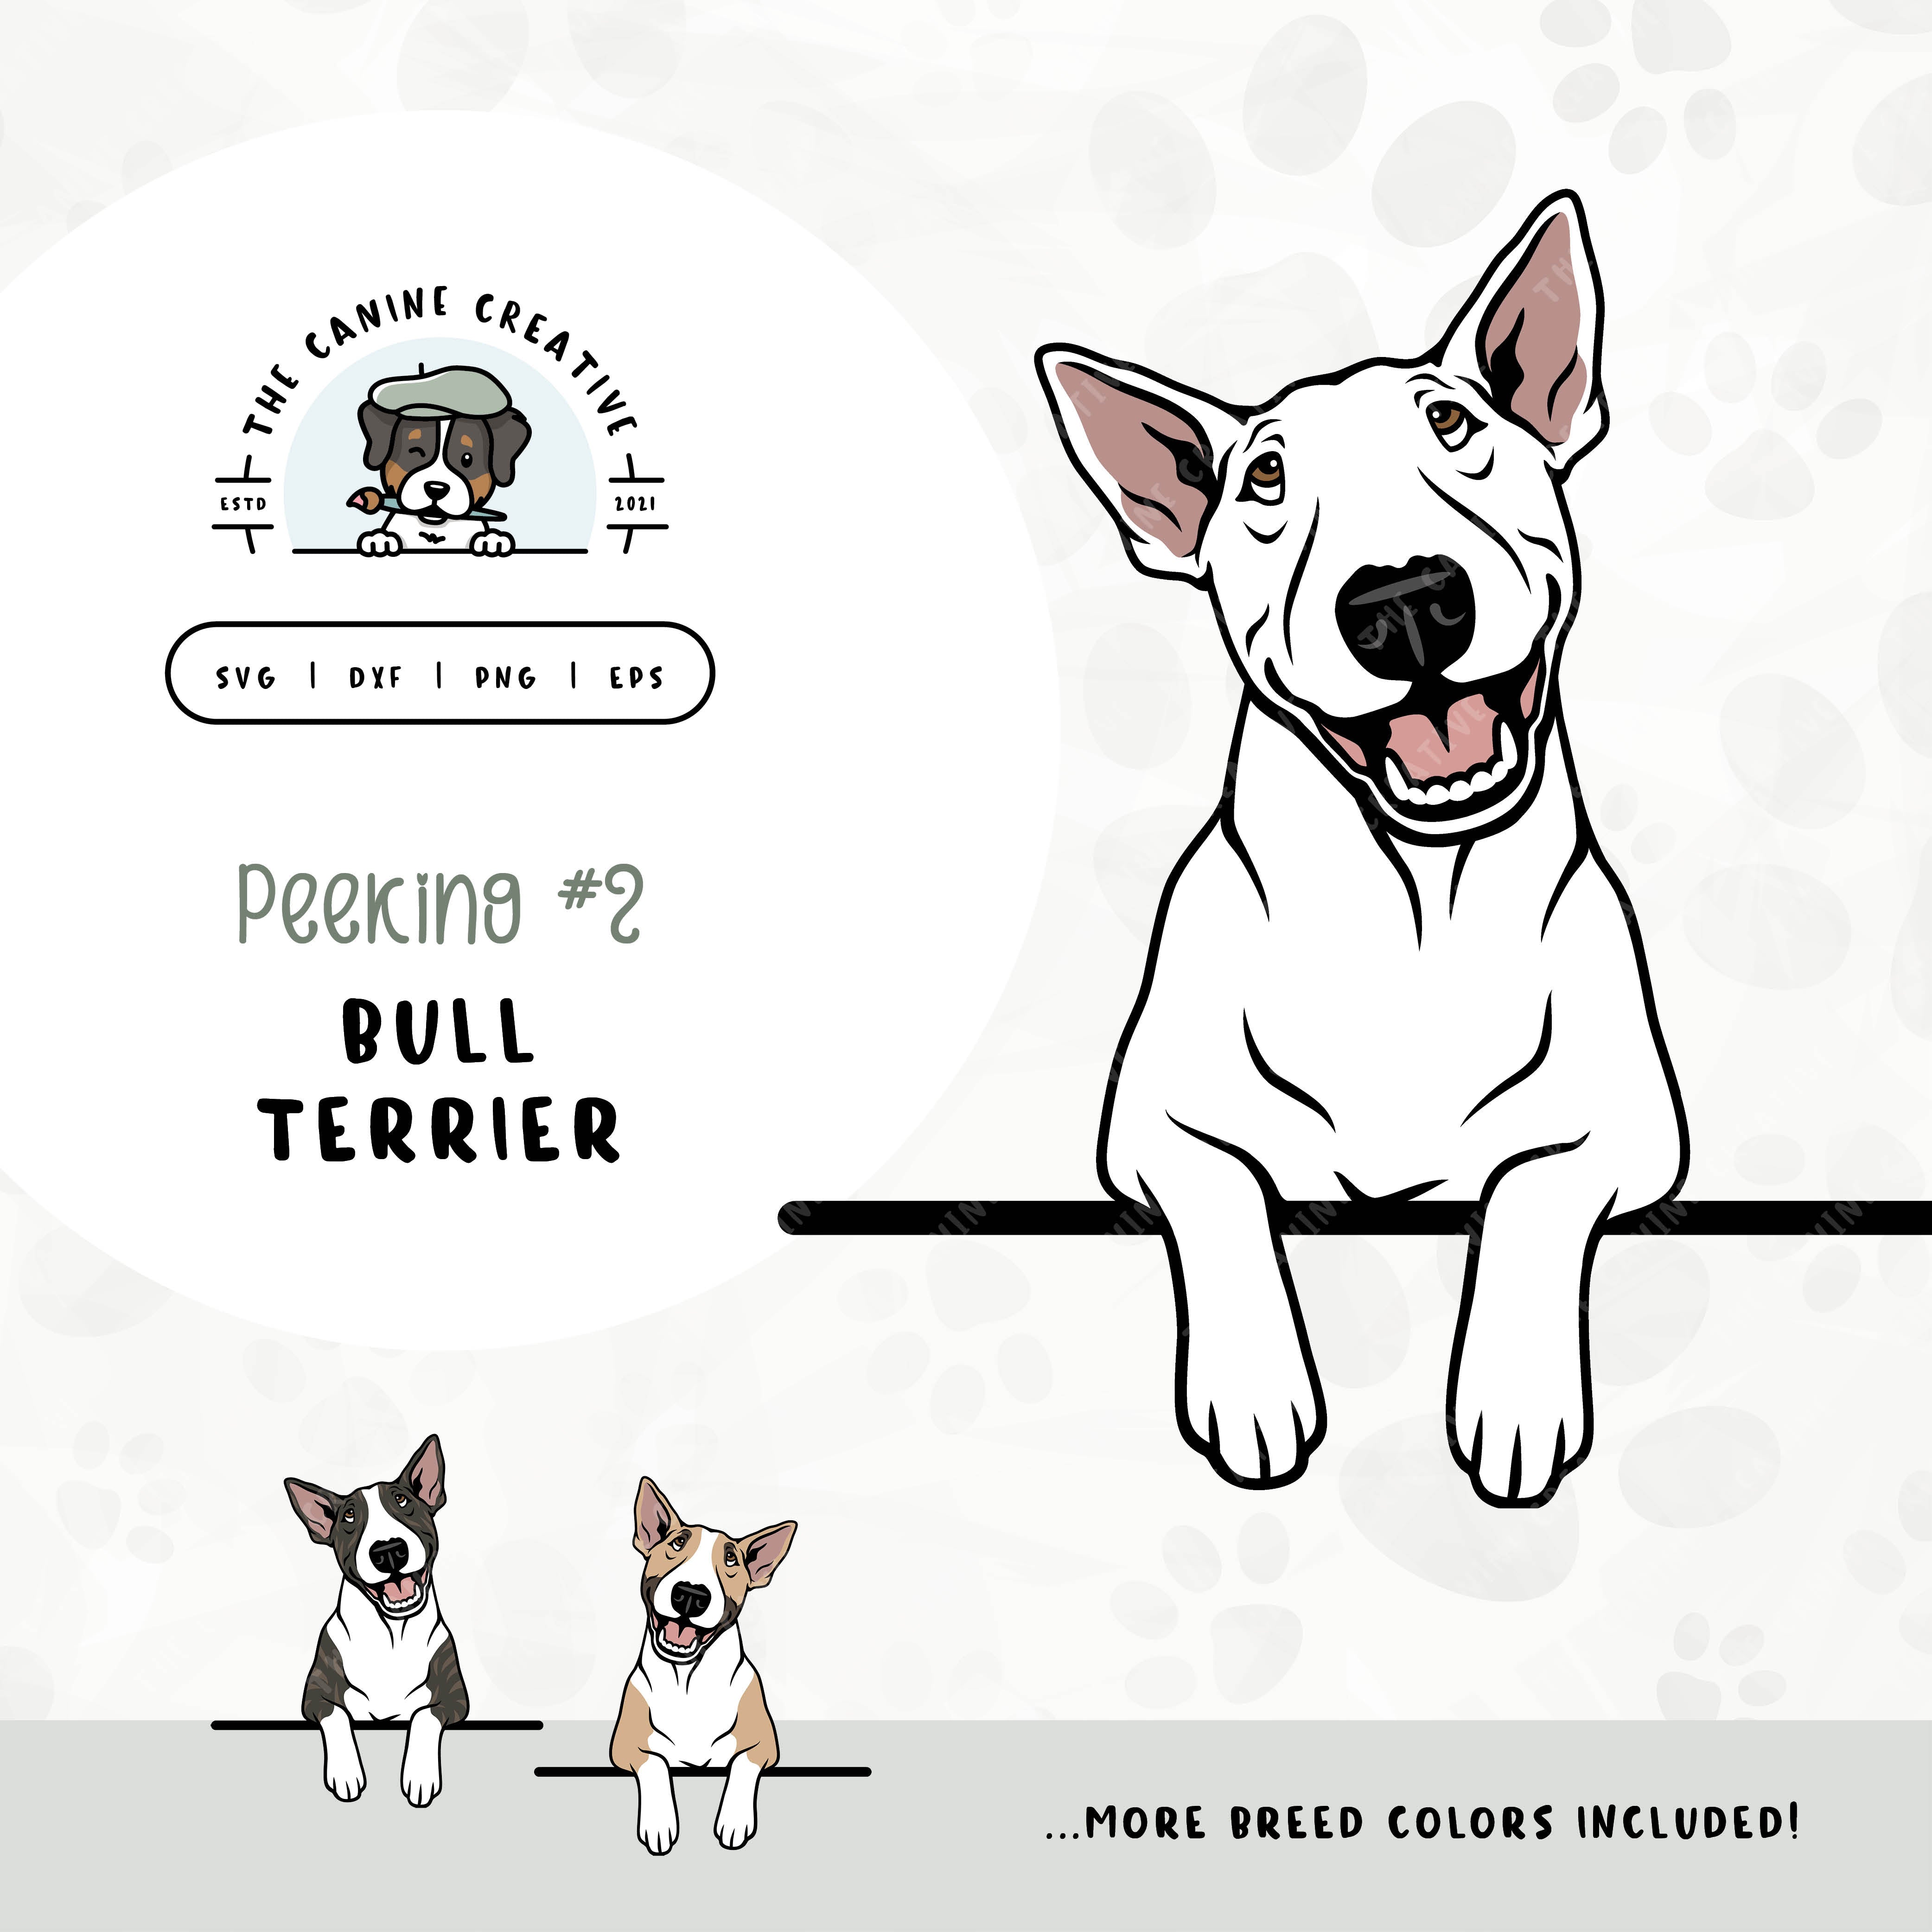 This illustrated design features a peeking Bull Terrier. File formats include: SVG, DXF, PNG, and EPS.